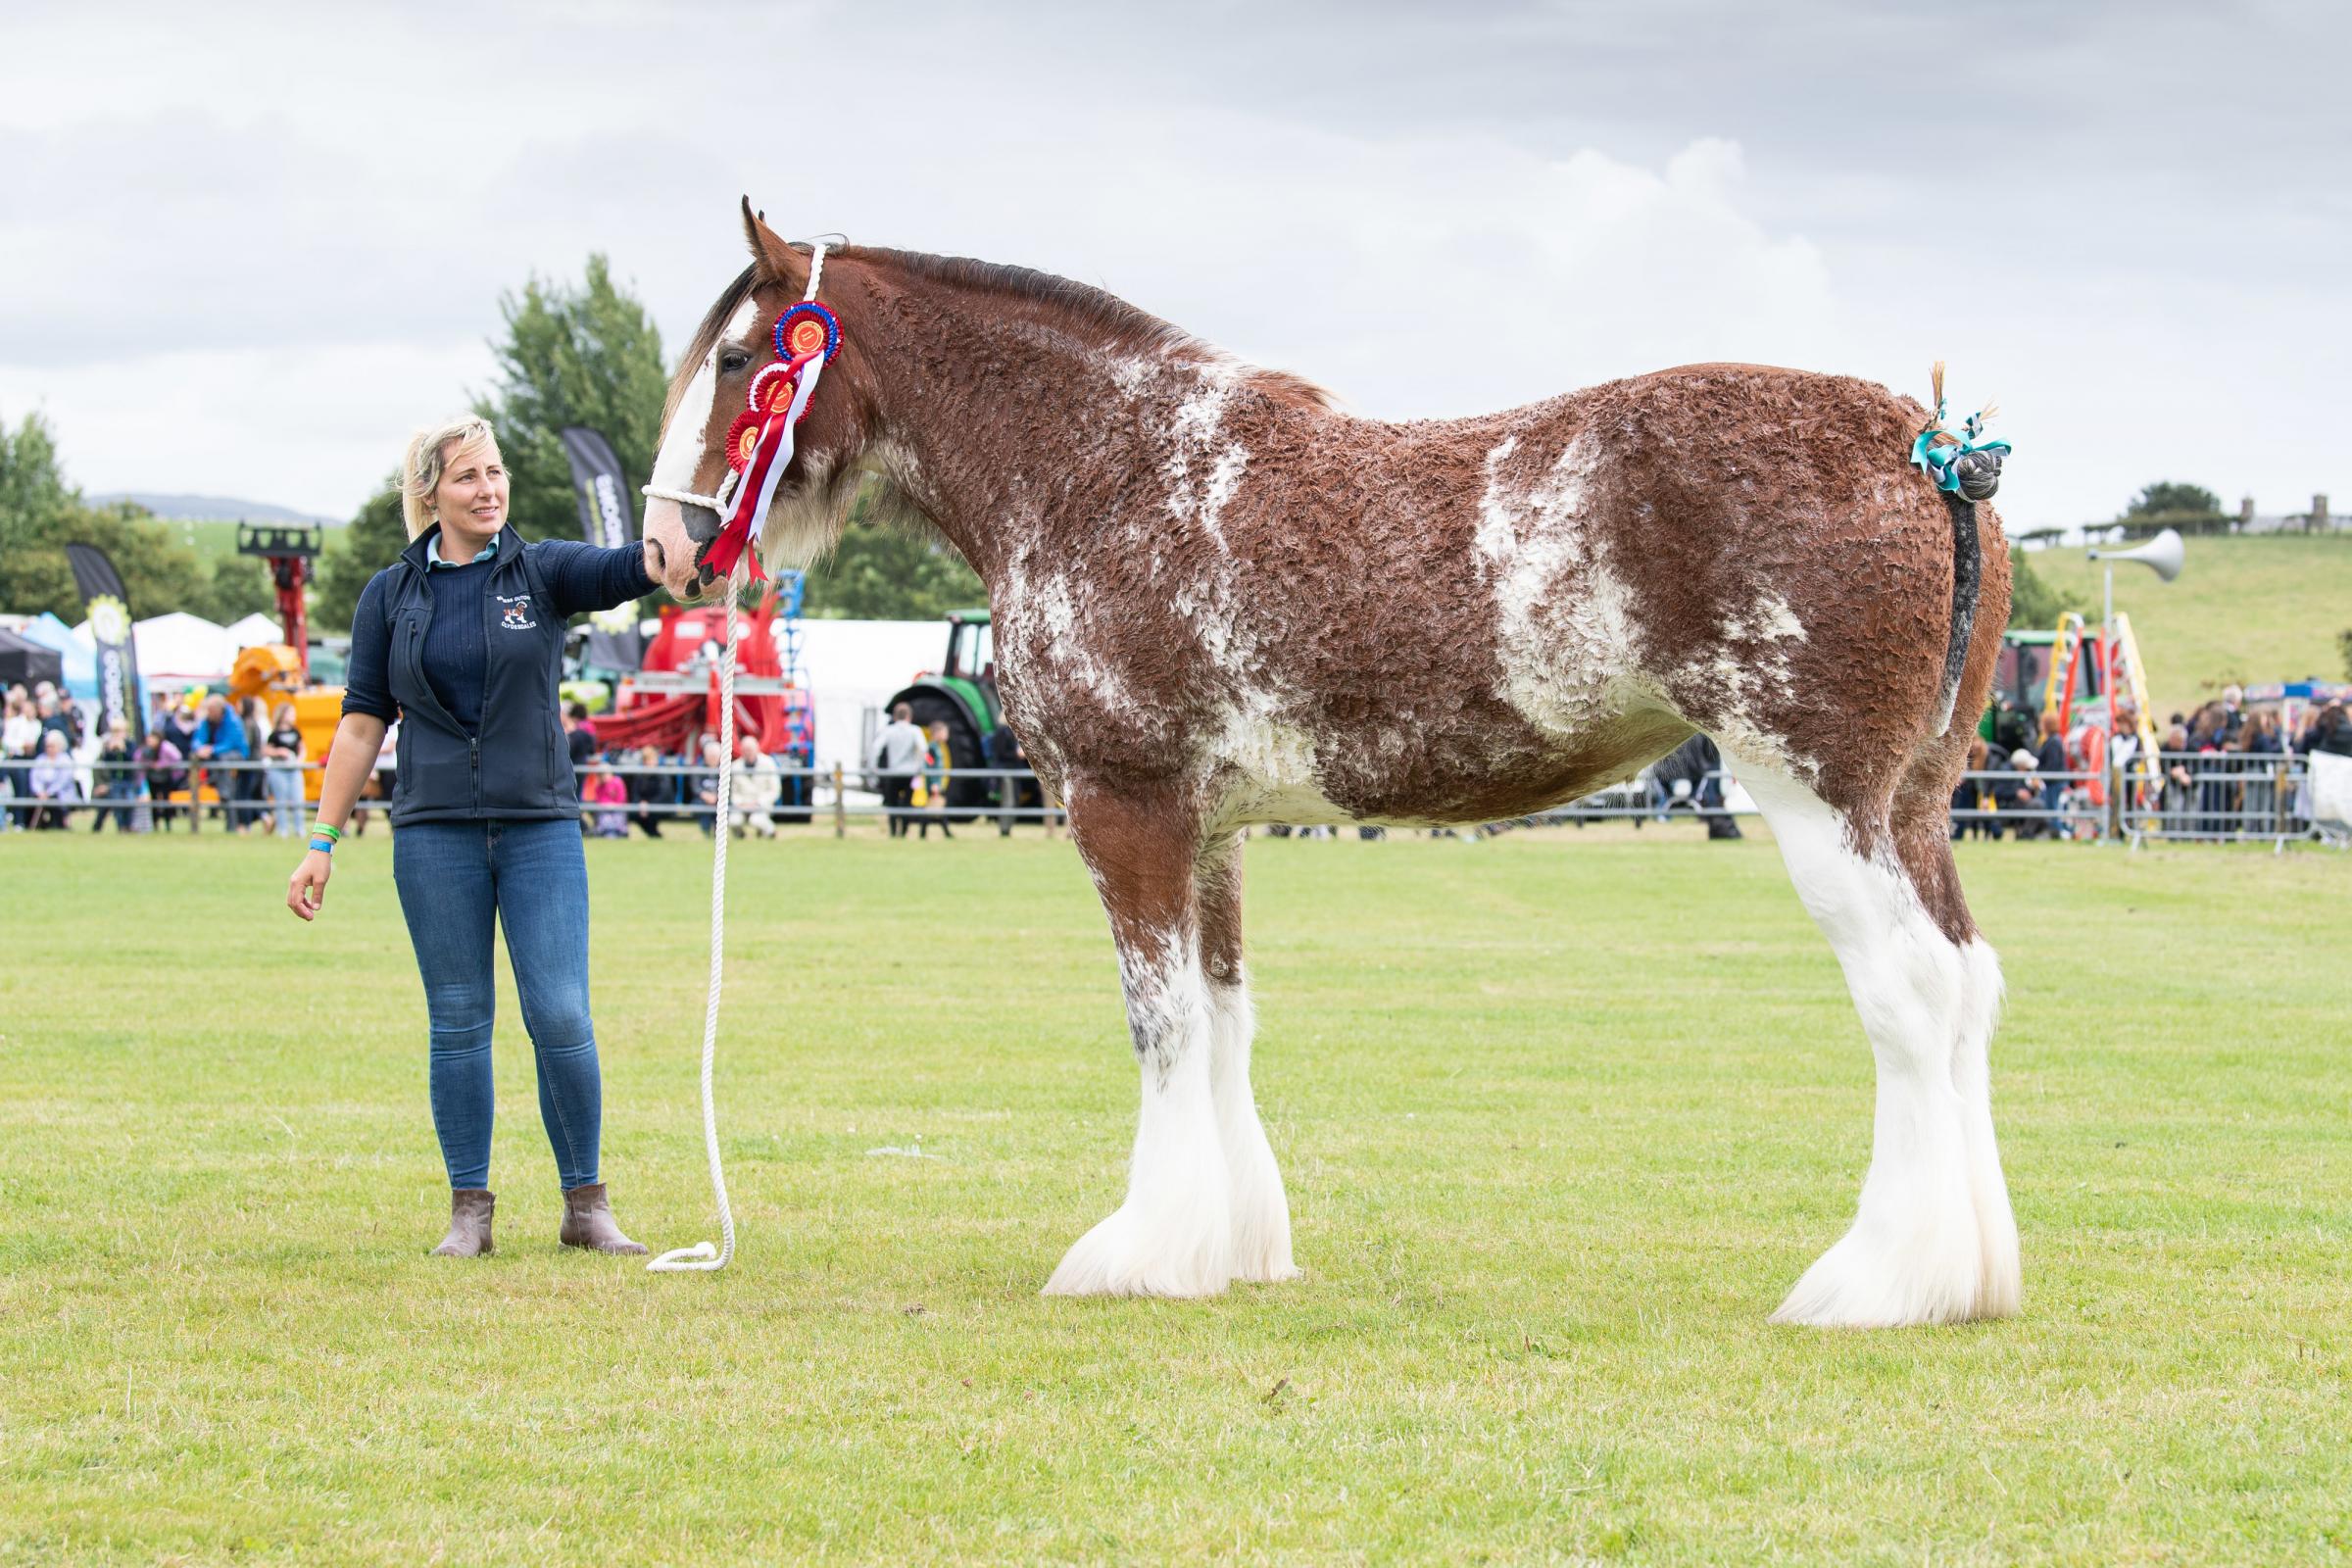 Burgess Outon Miracle stood overall Clydesdale champion for Colleen MarshallRef:RH030822052 Rob Haining / The Scottish Farmer...